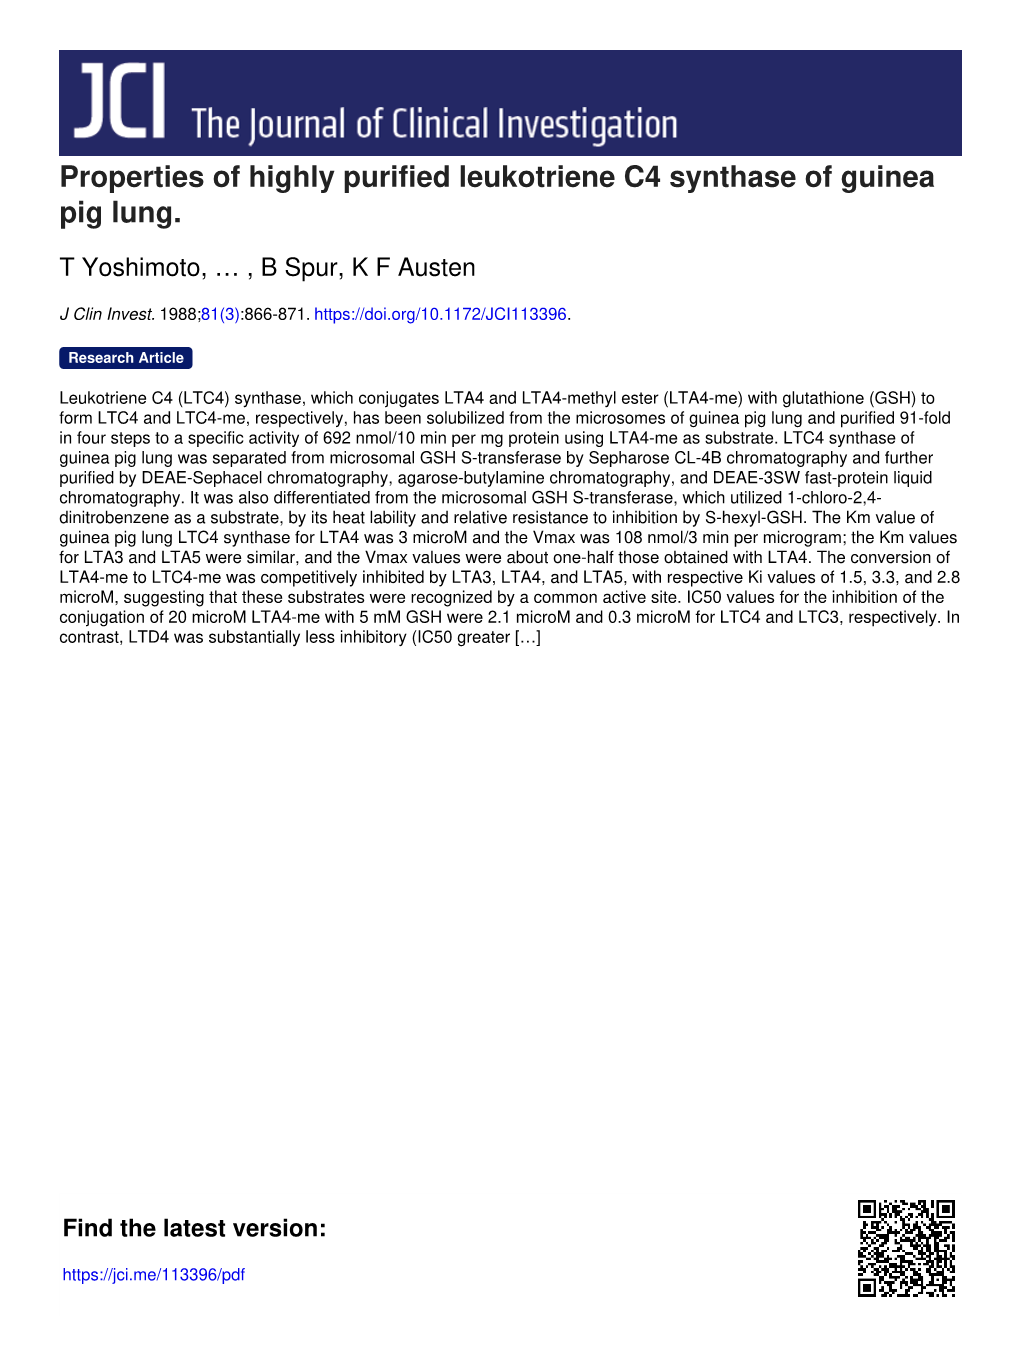 Properties of Highly Purified Leukotriene C4 Synthase of Guinea Pig Lung